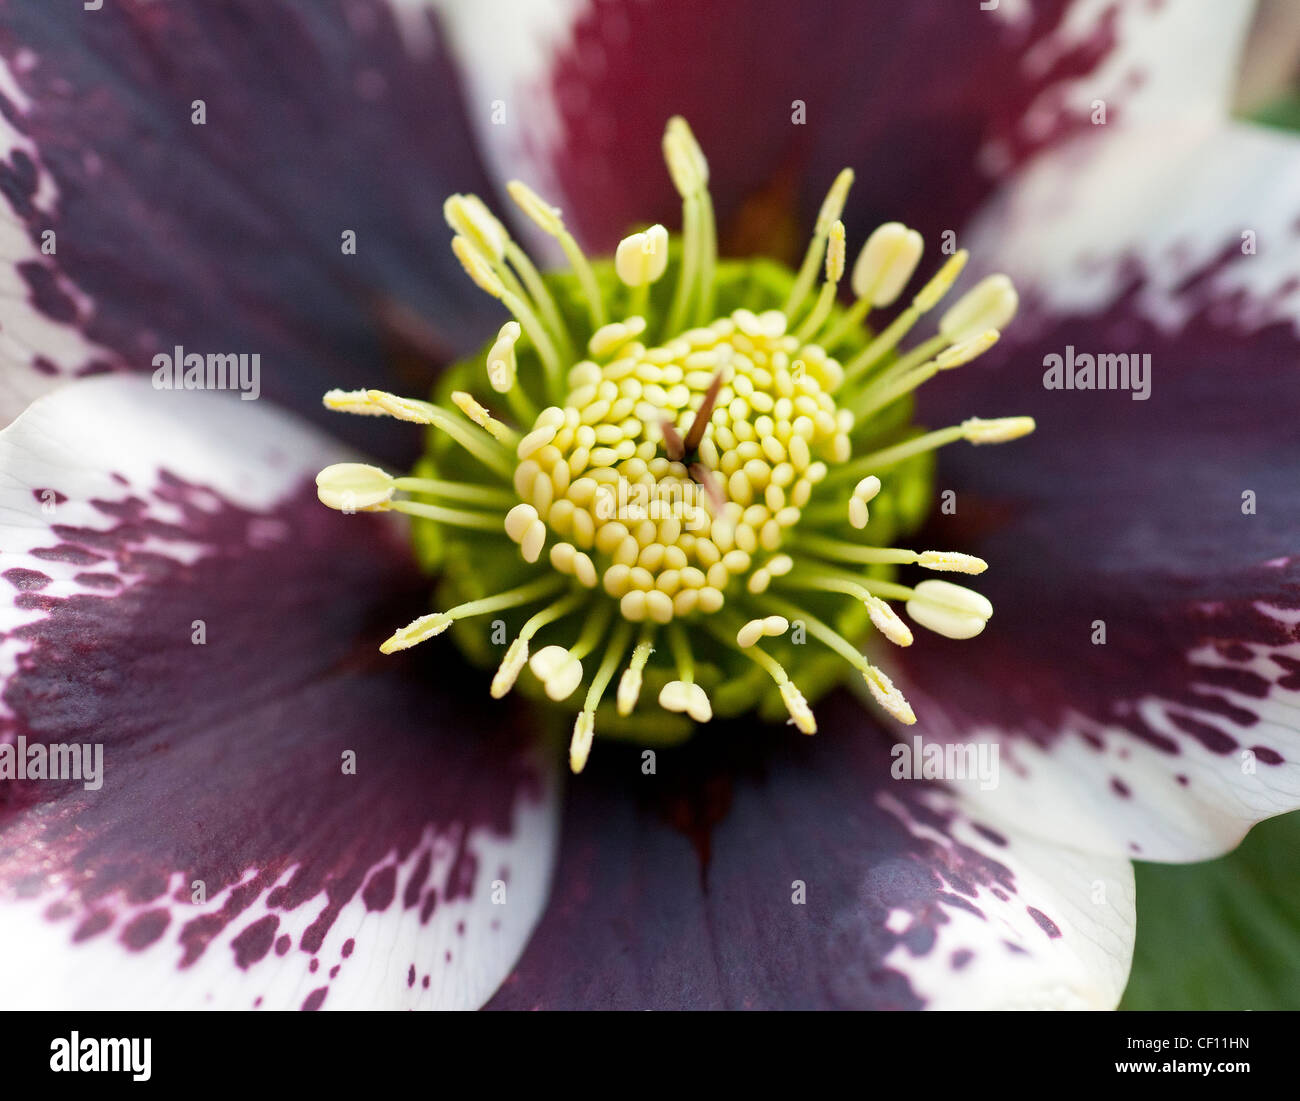 Macro photography of a Christmas Rose with strong purple patterns on the white petals, which stand out from the lime  seed head Stock Photo